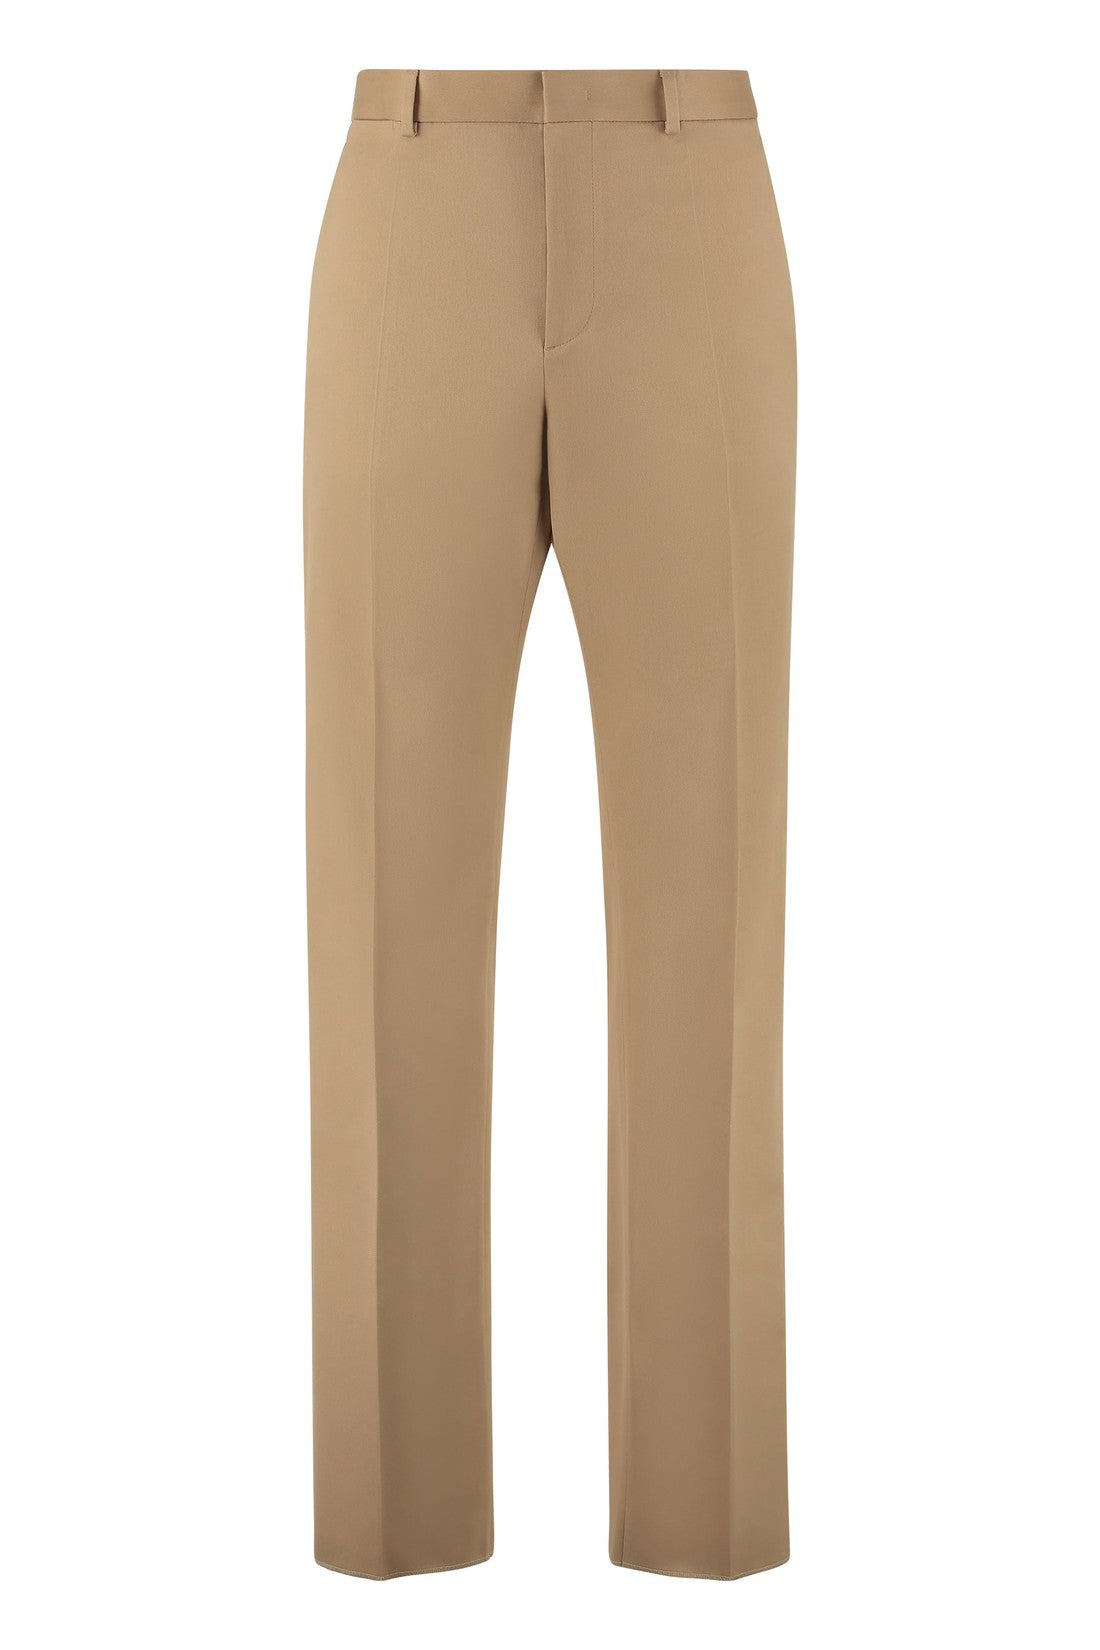 Valentino-OUTLET-SALE-Stretch cotton chino trousers-ARCHIVIST